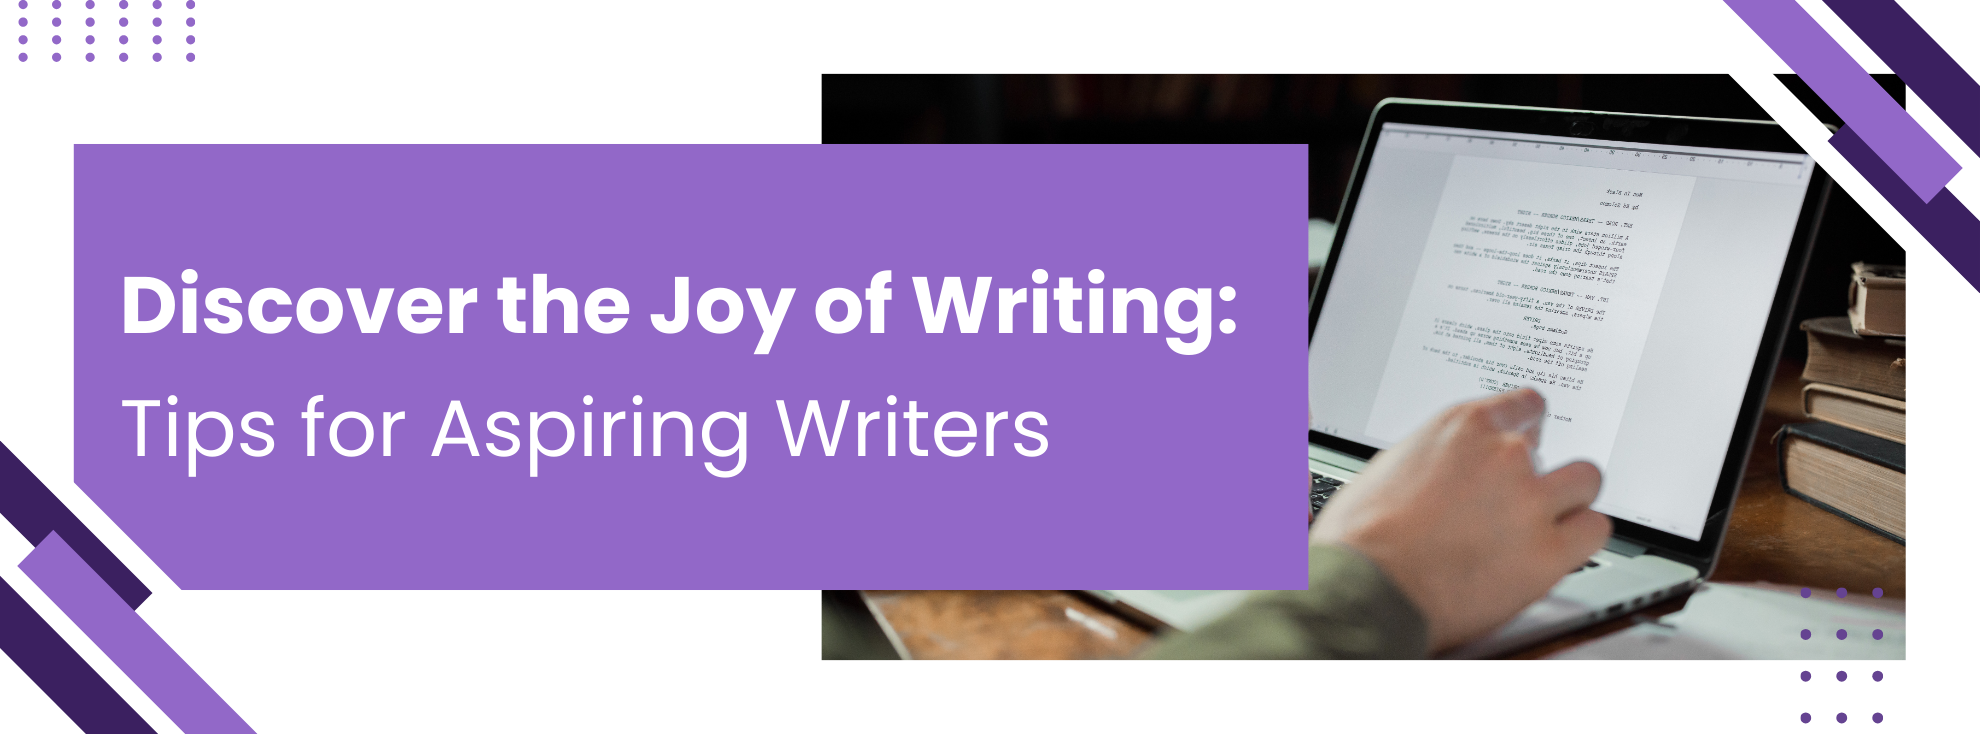 Discover the Joy of Writing: Tips for Aspiring Writers - featured image